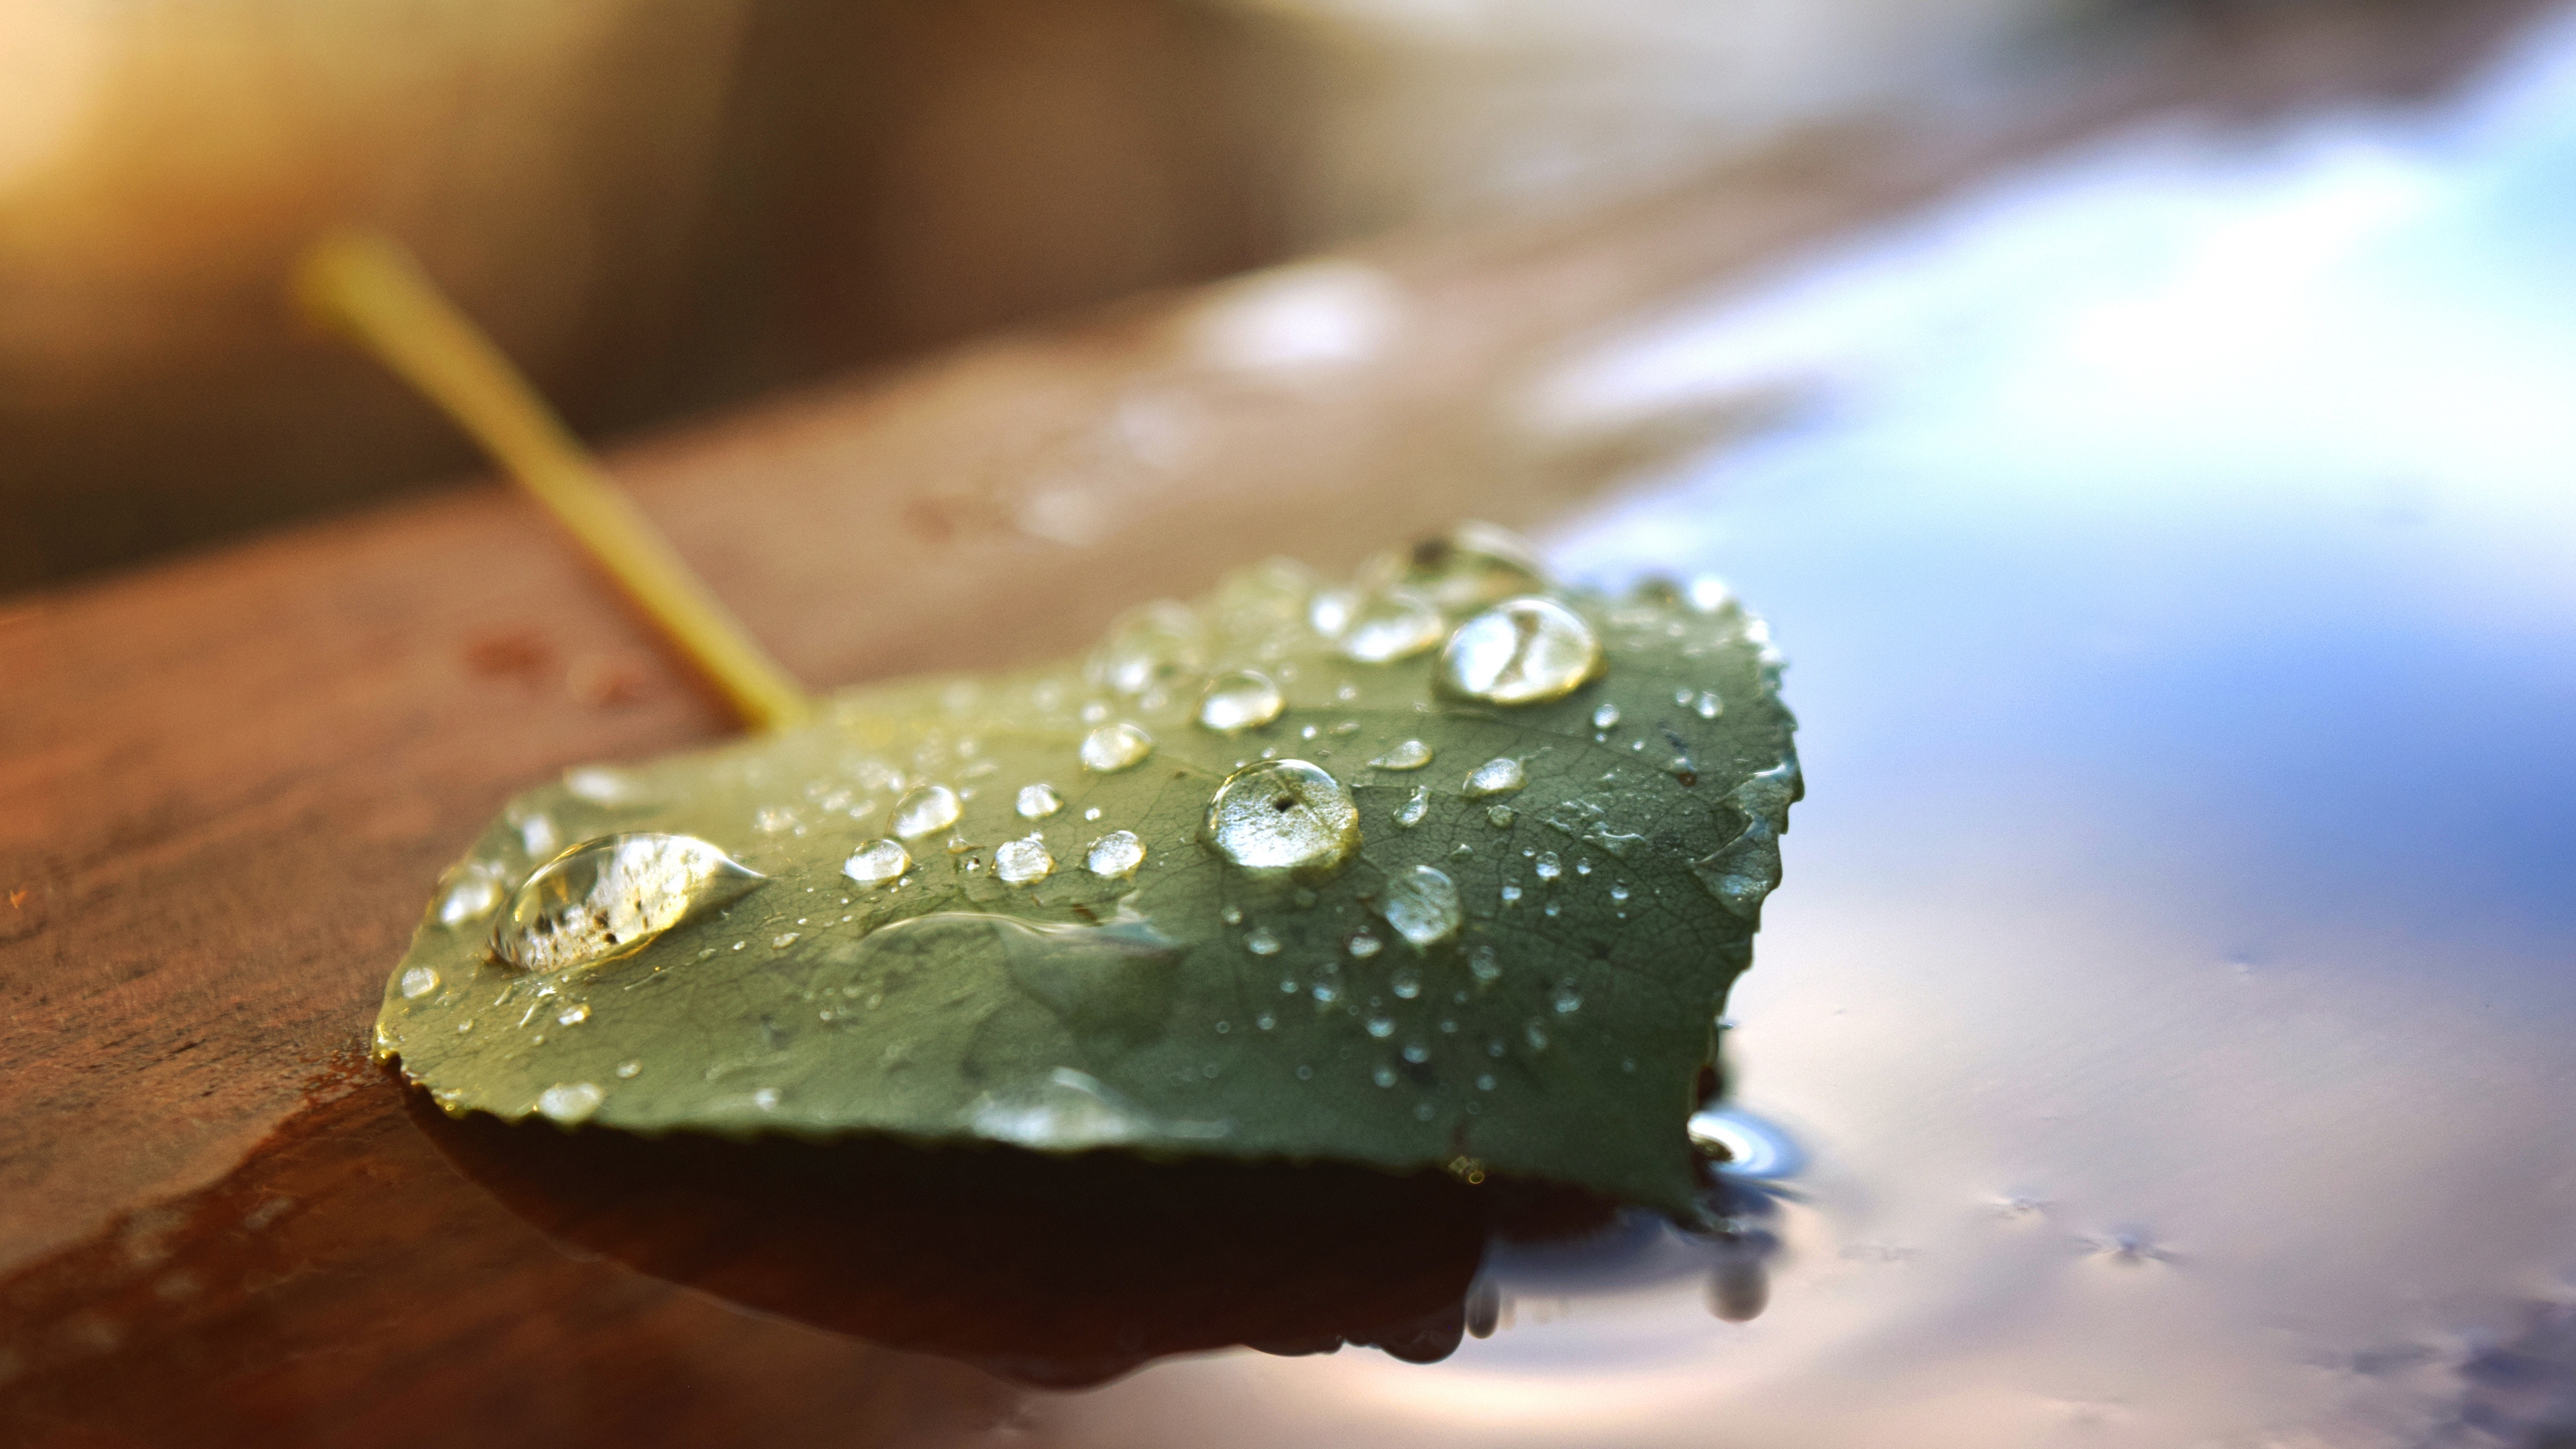 Beautiful Water Drops on a Leaf for 3840 x 2160 Ultra HD resolution